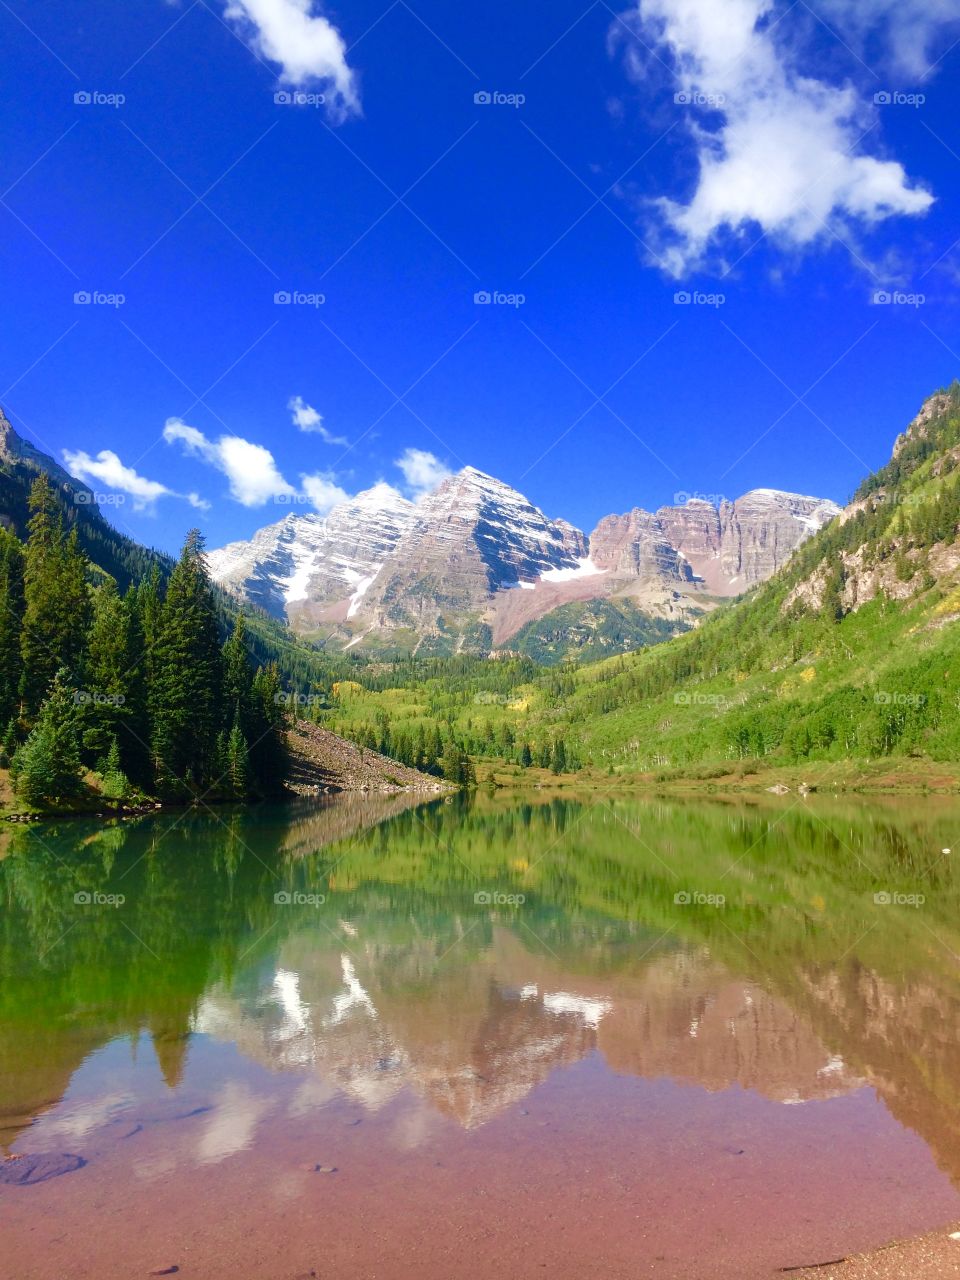 Maroon Bells, Aspen, CO. The most photographed mountains in Colorado. I was blessed with a beautiful day.